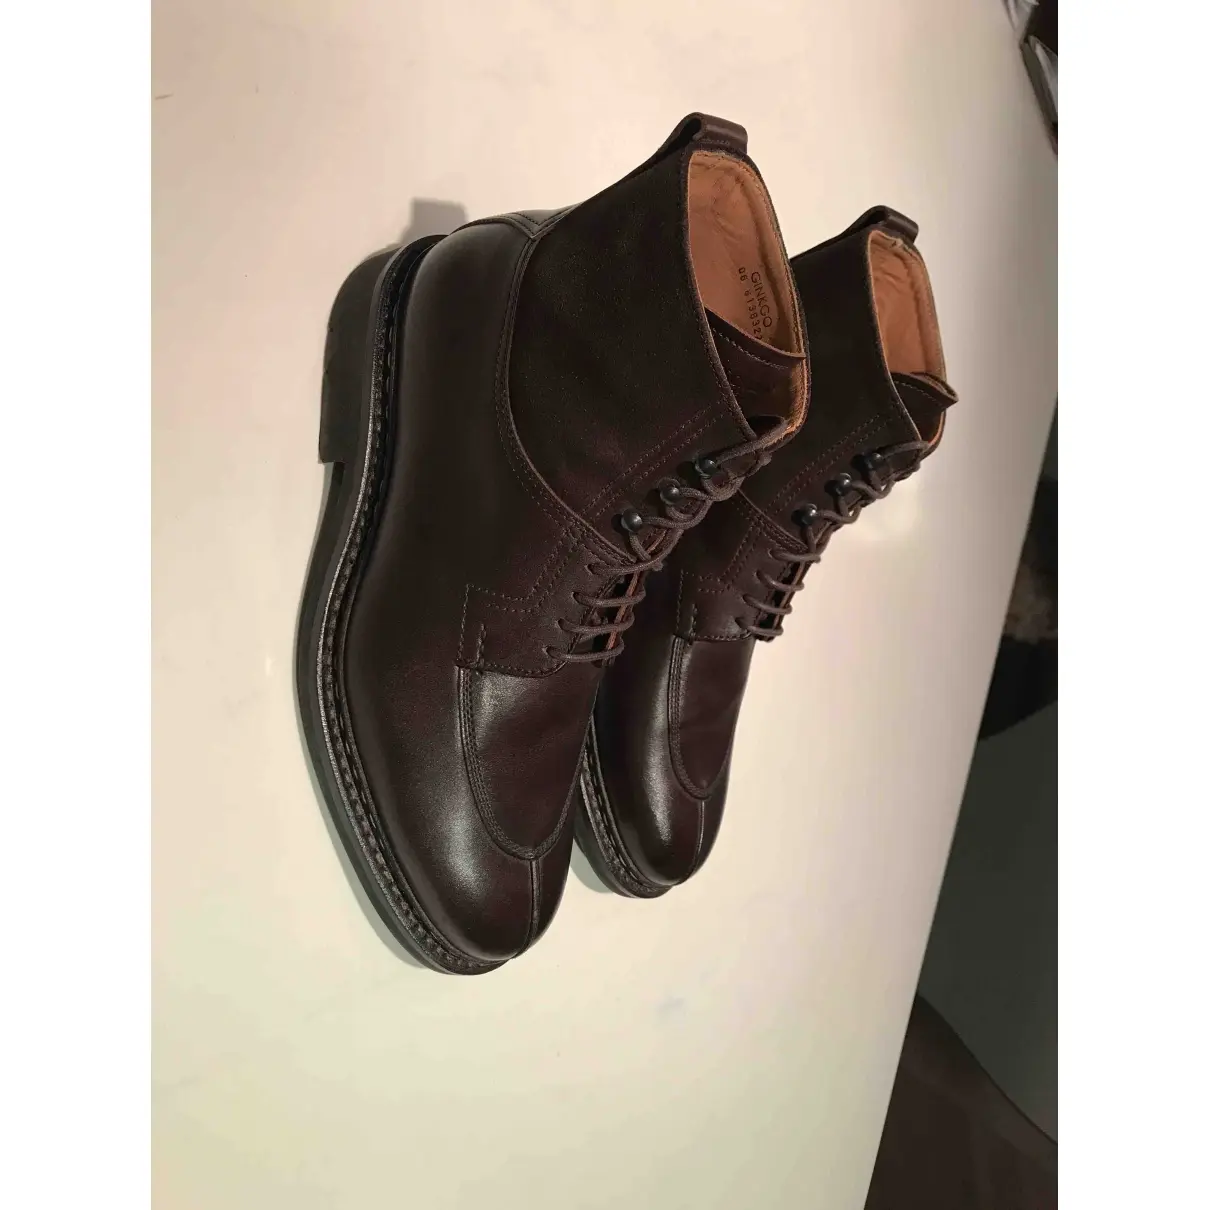 Heschung Leather boots for sale